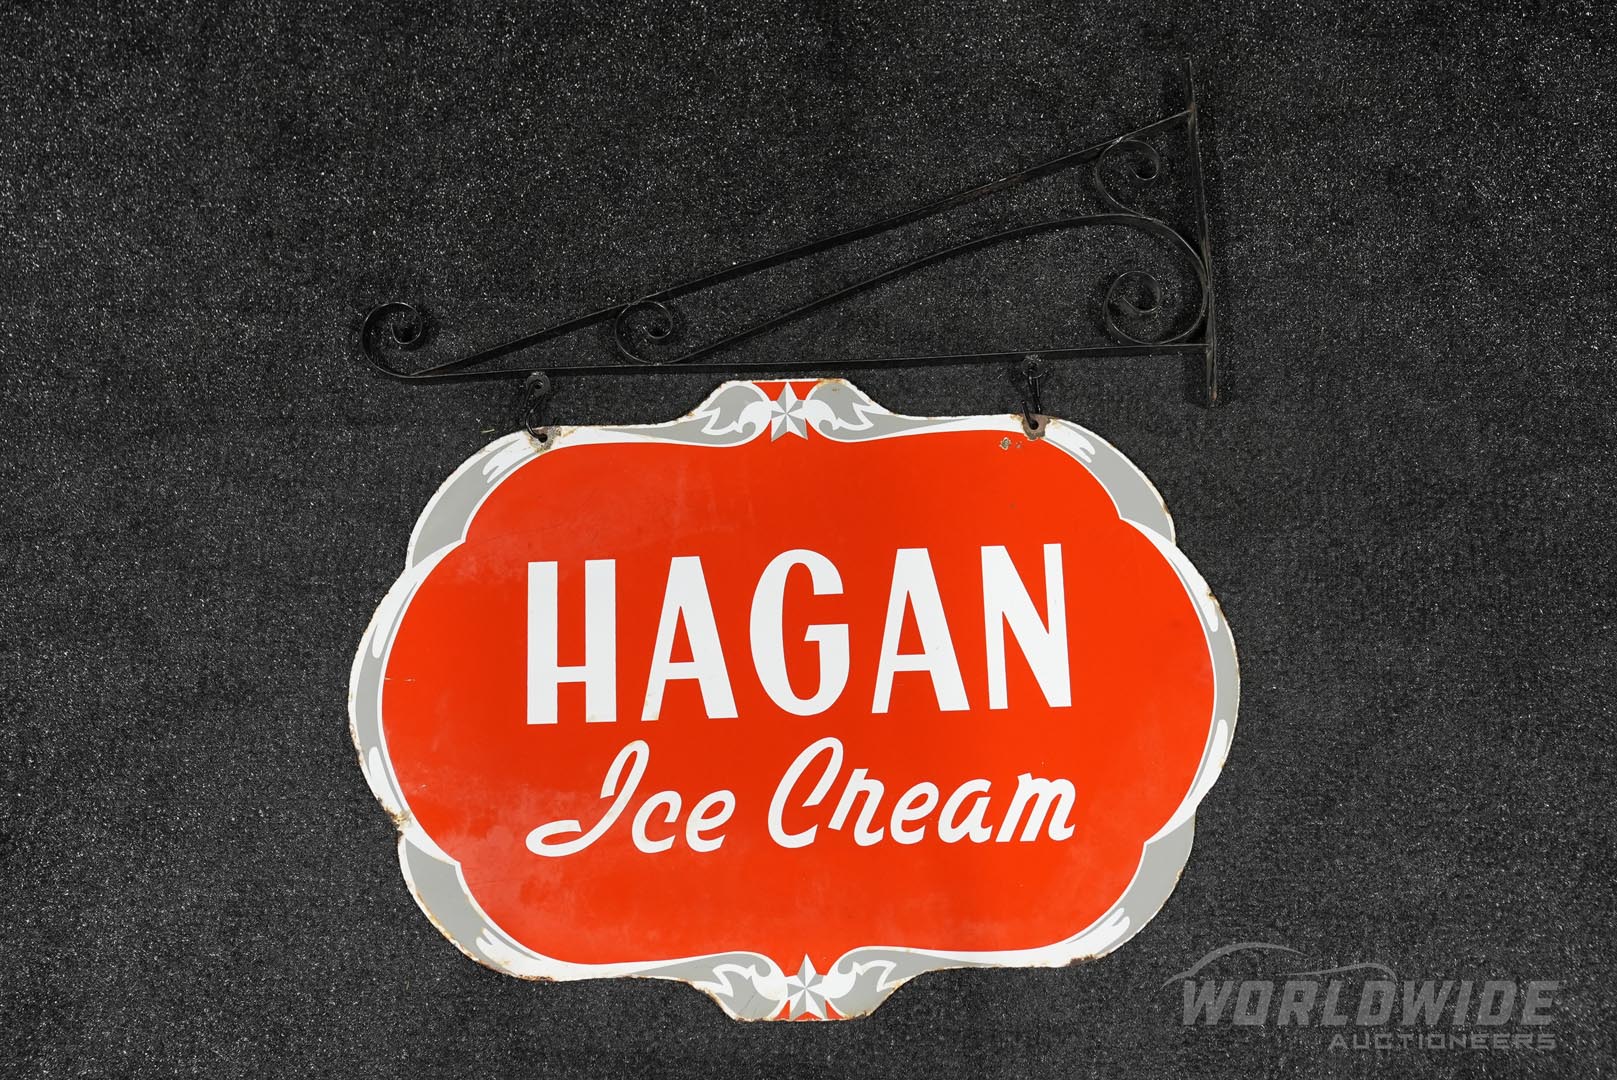 Original Hagan Ice Cream Double-Sided Porcelain Sign with Wall Hanger